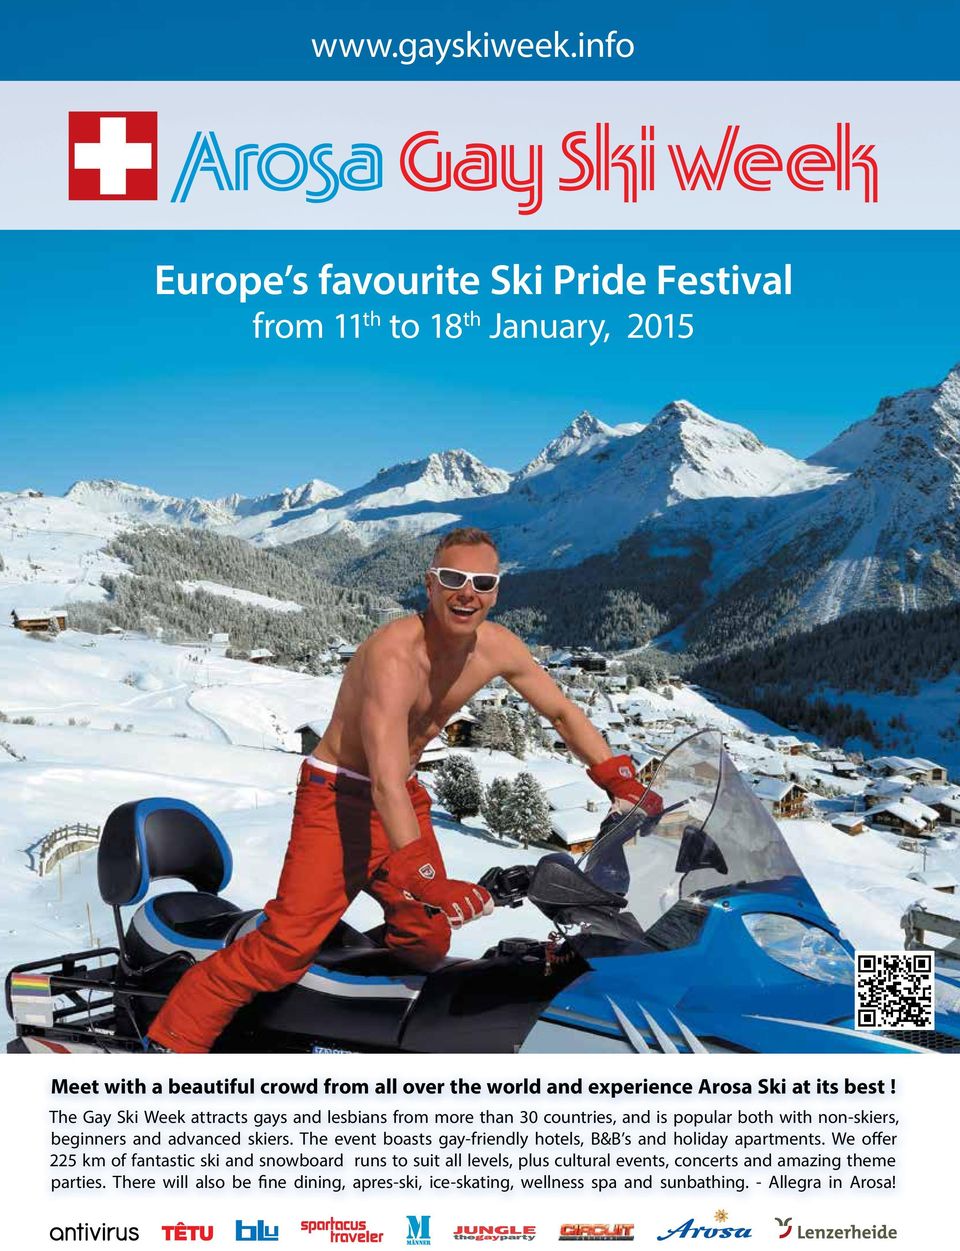 its best! The Gay Ski Week attracts gays and lesbians from more than 30 countries, and is popular both with non-skiers, beginners and advanced skiers.